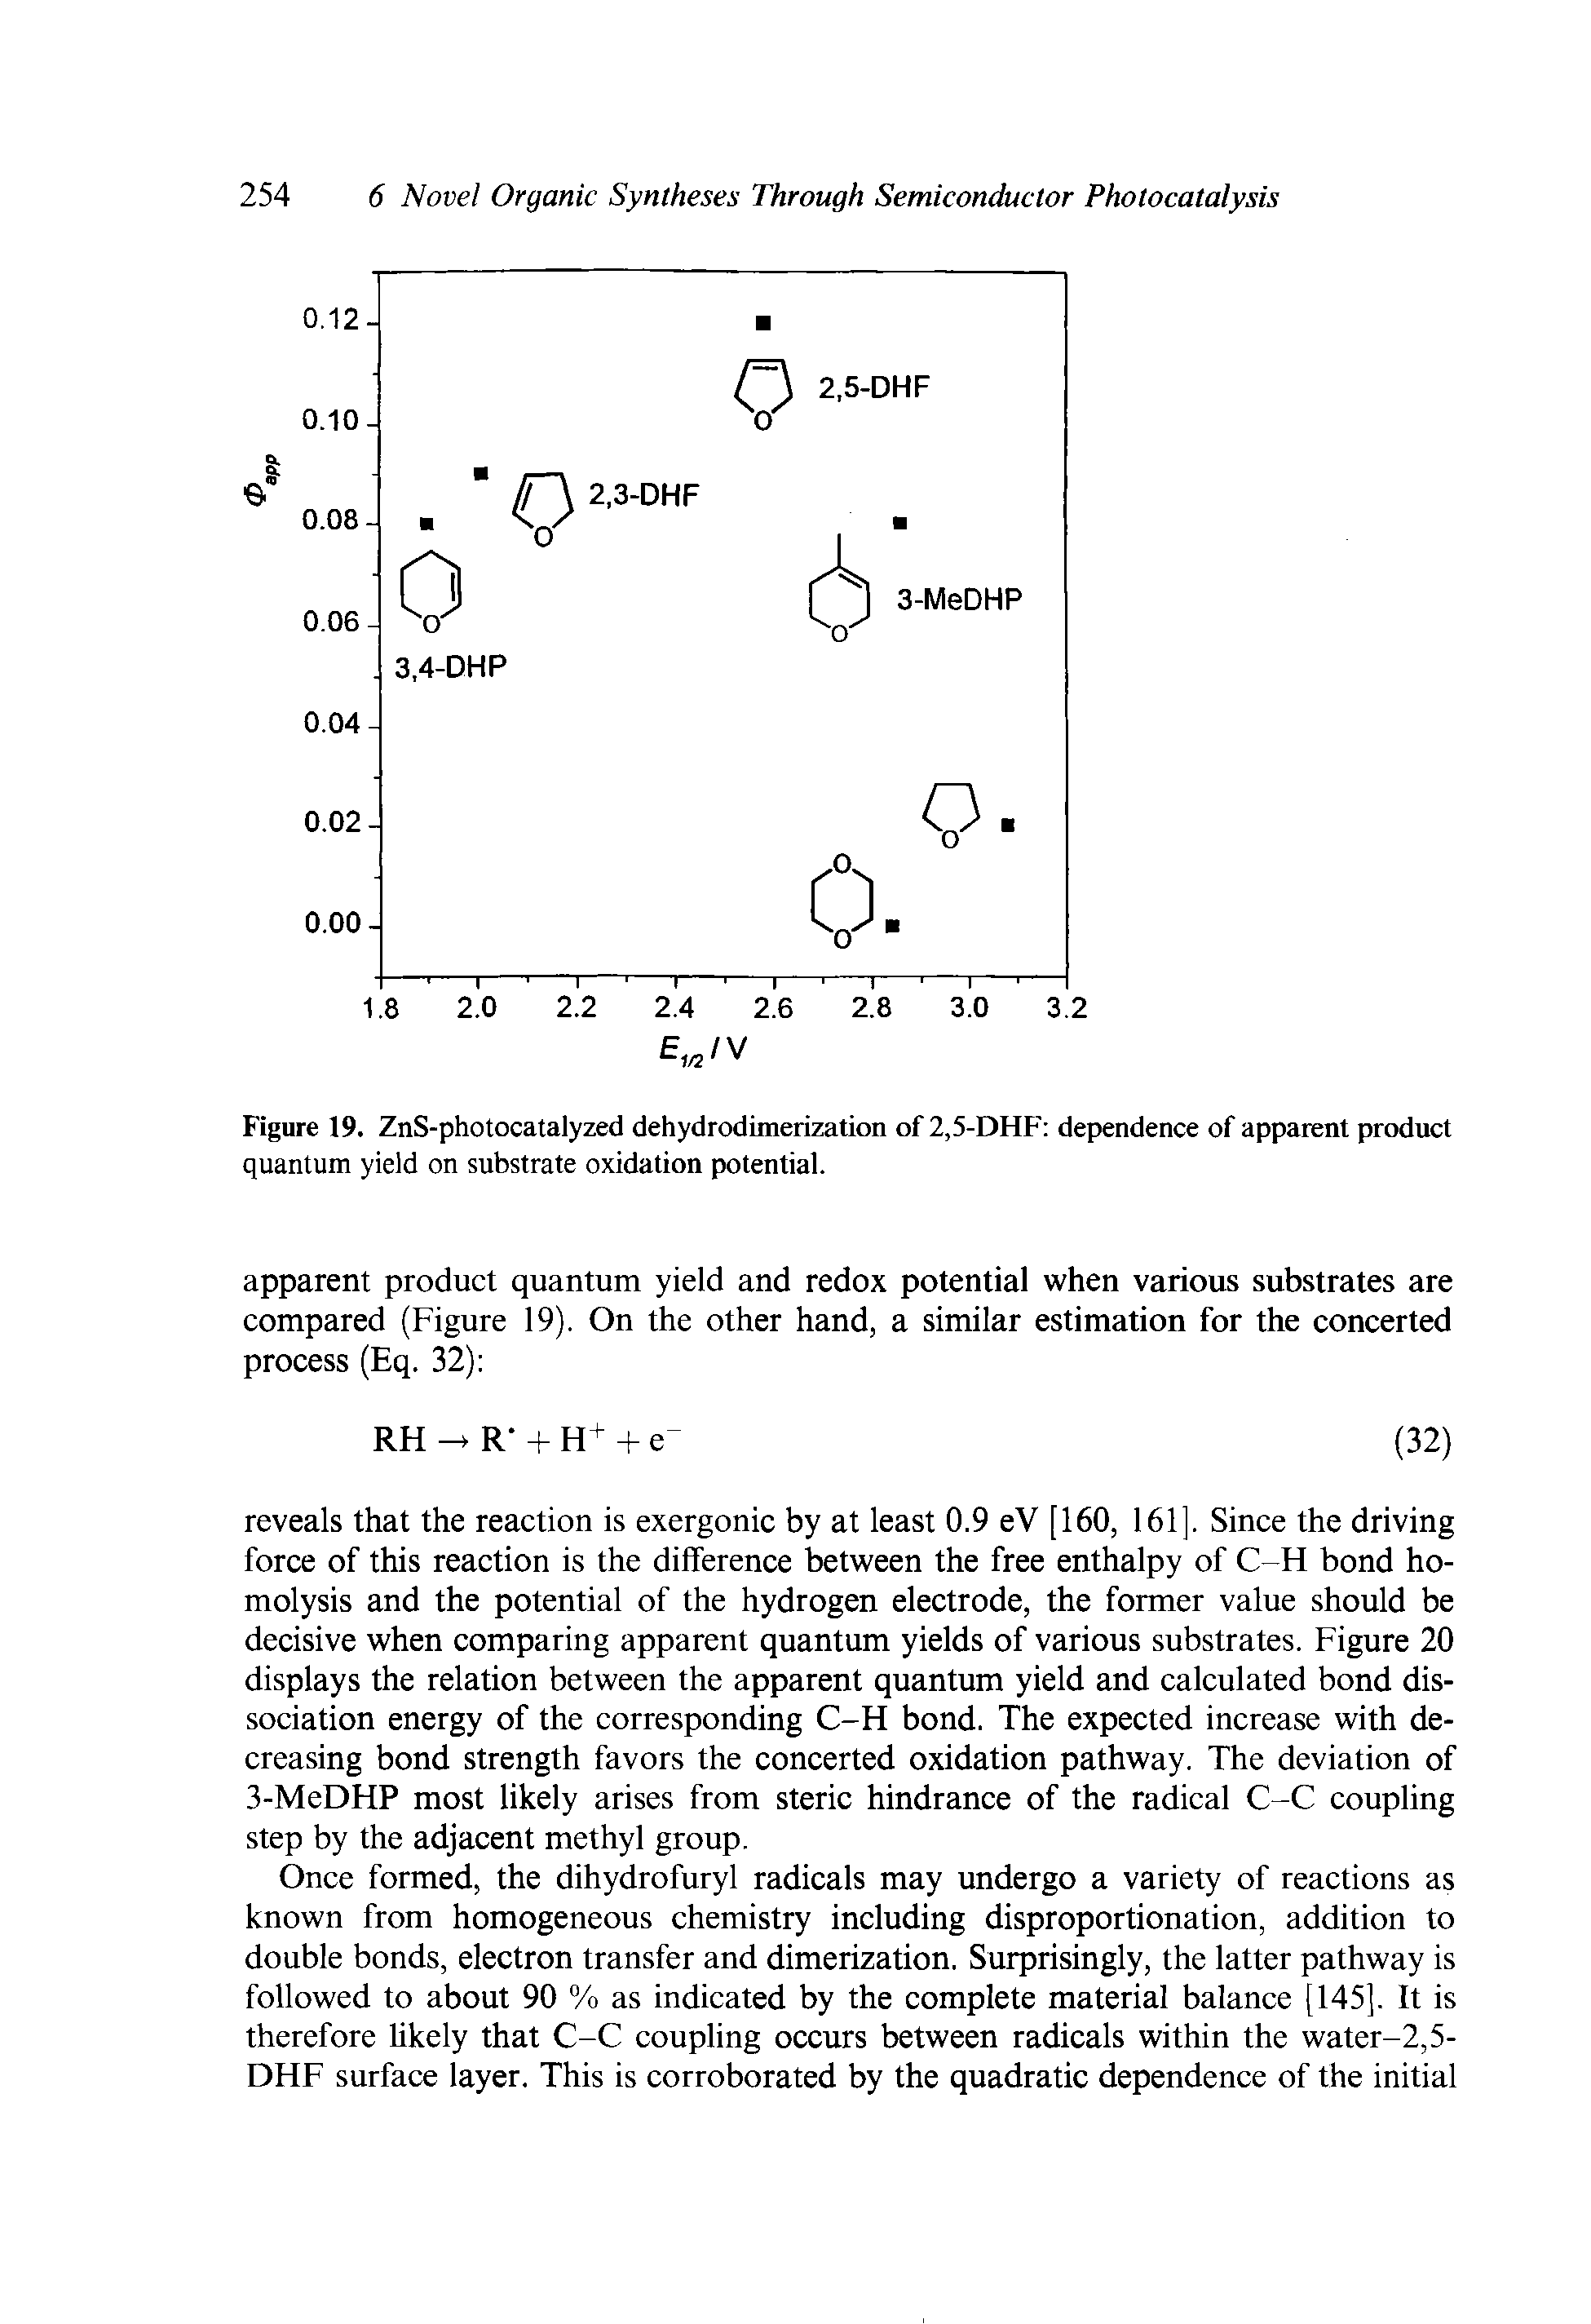 Figure 19. ZnS-photocatalyzed dehydrodimerization of 2,5-DHF dependence of apparent product quantum yield on substrate oxidation potential.